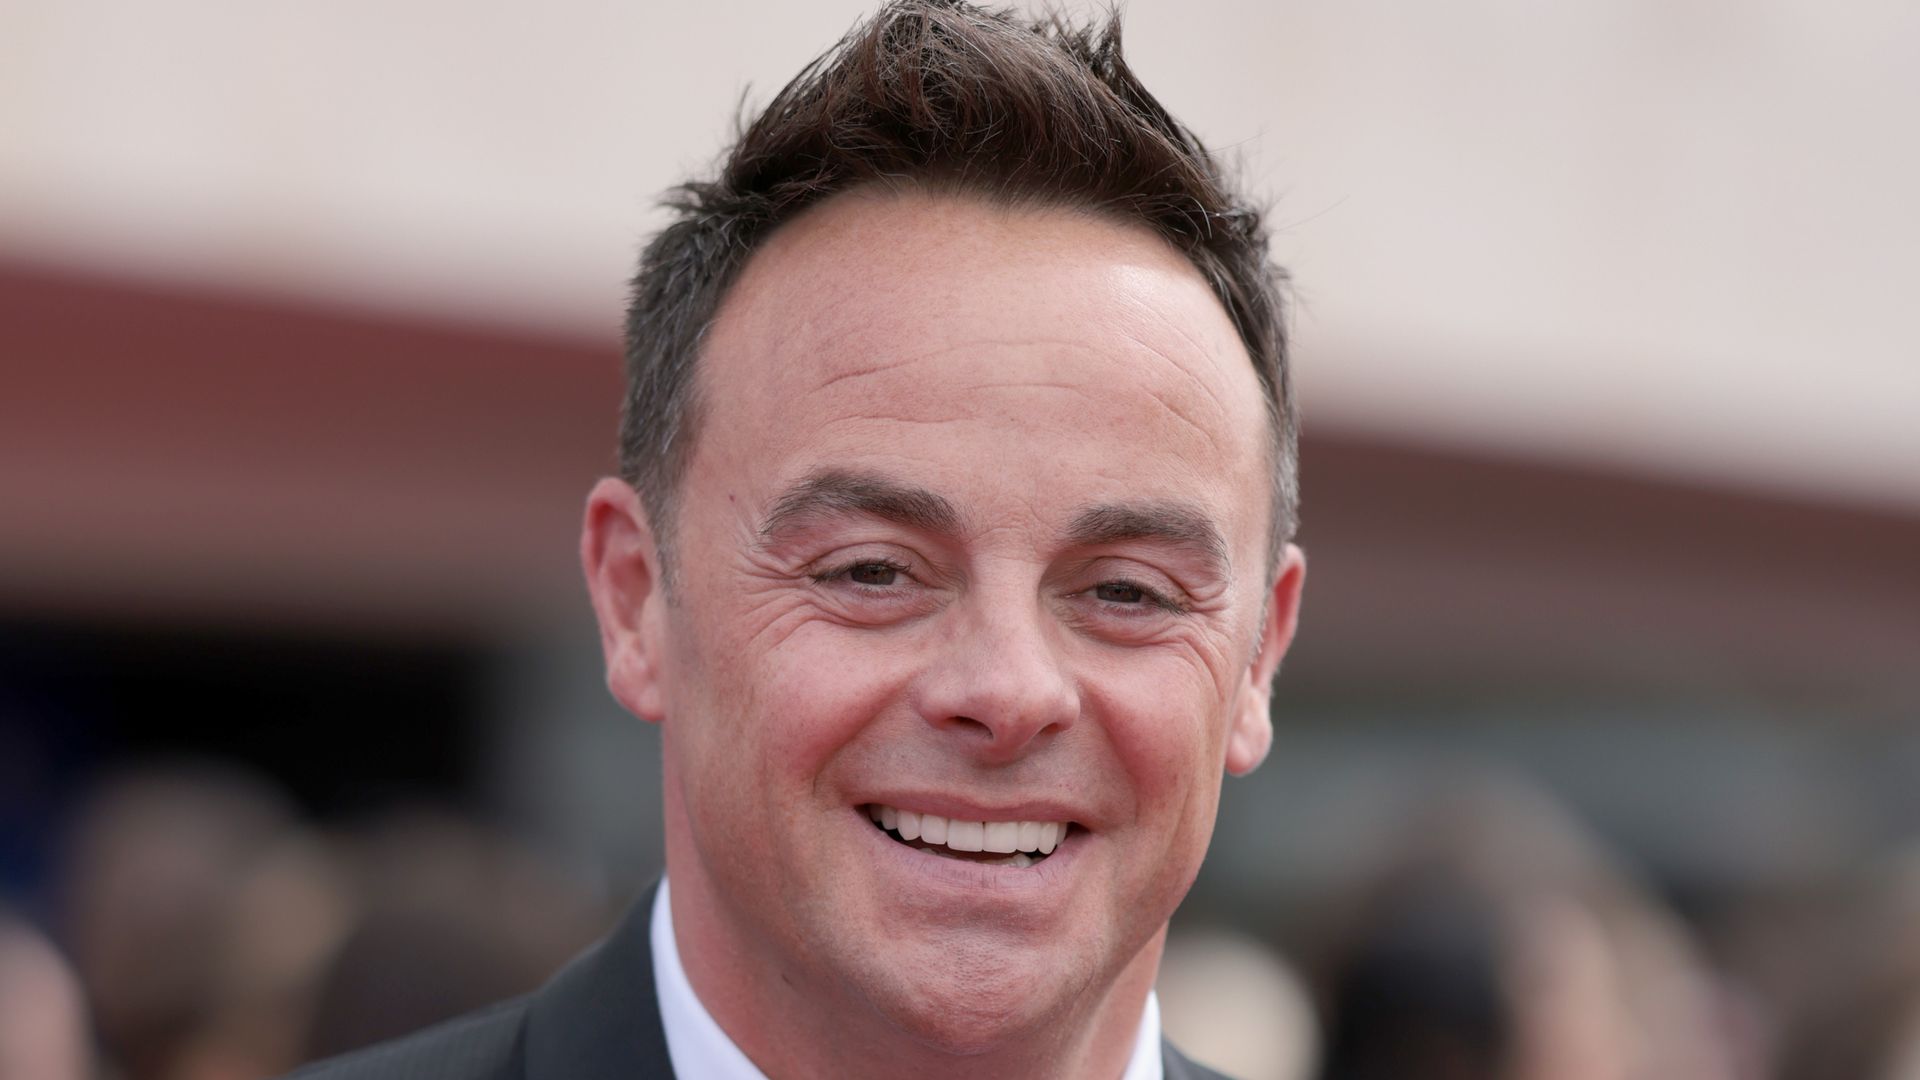 Anthony McPartlin wearing a tuxedo on red carpet